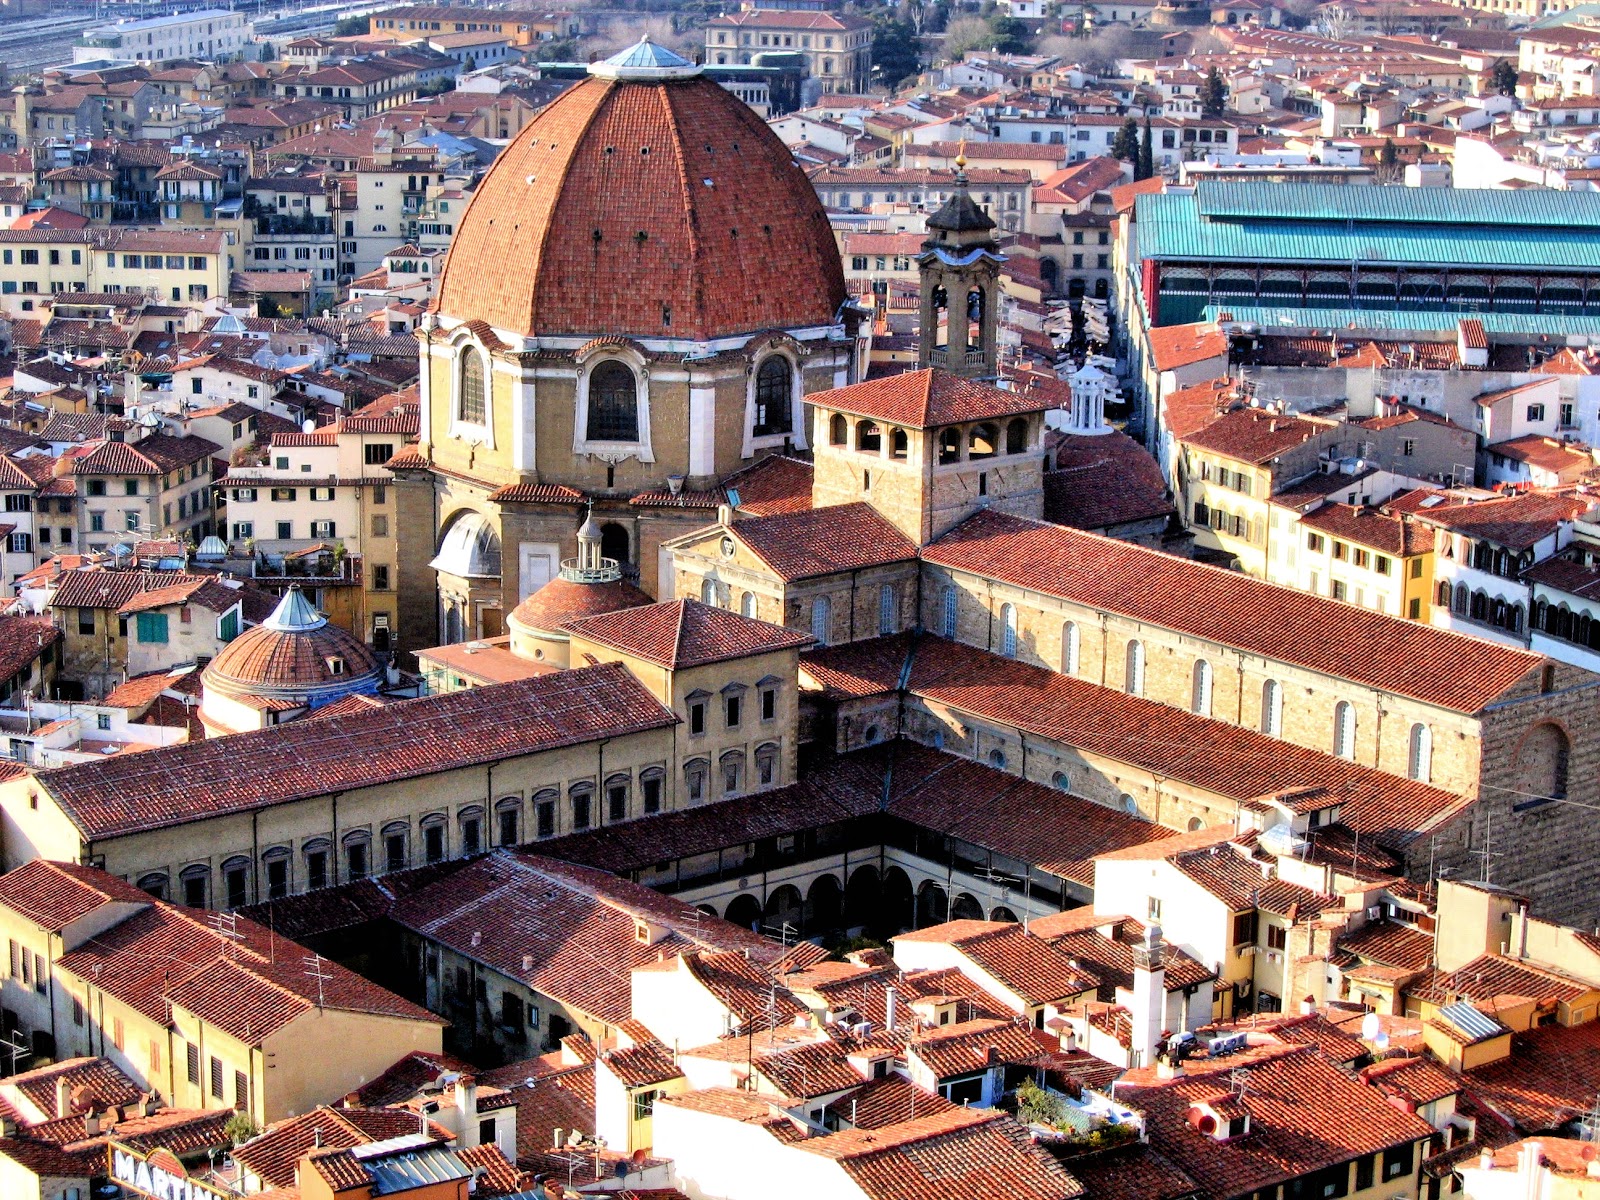 Aerial view of San Lorenzo. The section that extends from beneath the dome to the lower left is the Laurentian Library. Look carefully to the right of the dome, and you'll see the smaller dome of the Medici Chapel with white-marble cupola. Photo: WikiMedia.org.